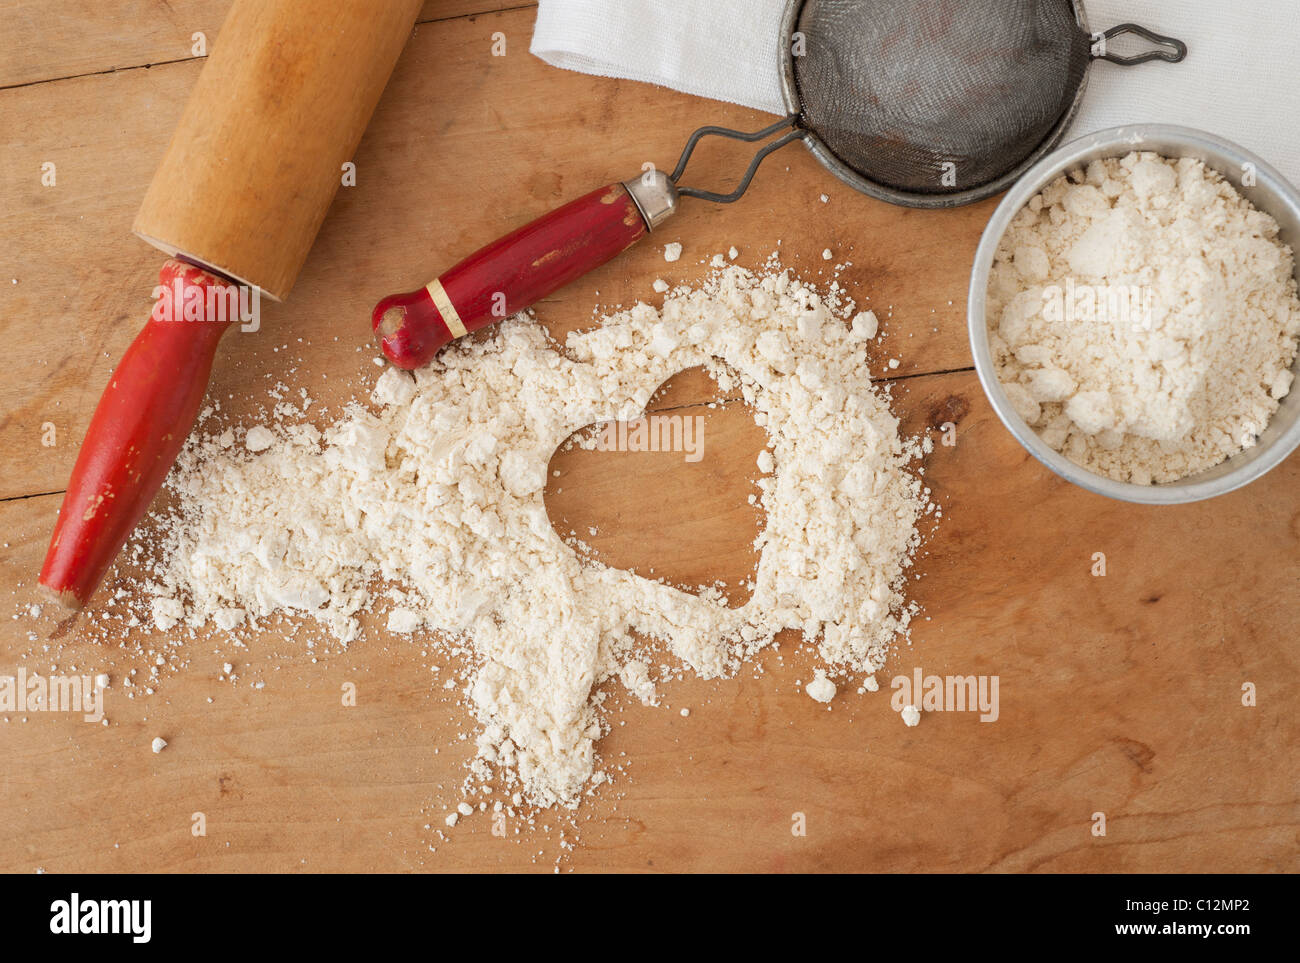 Heart shape in flour with baking utensils Stock Photo